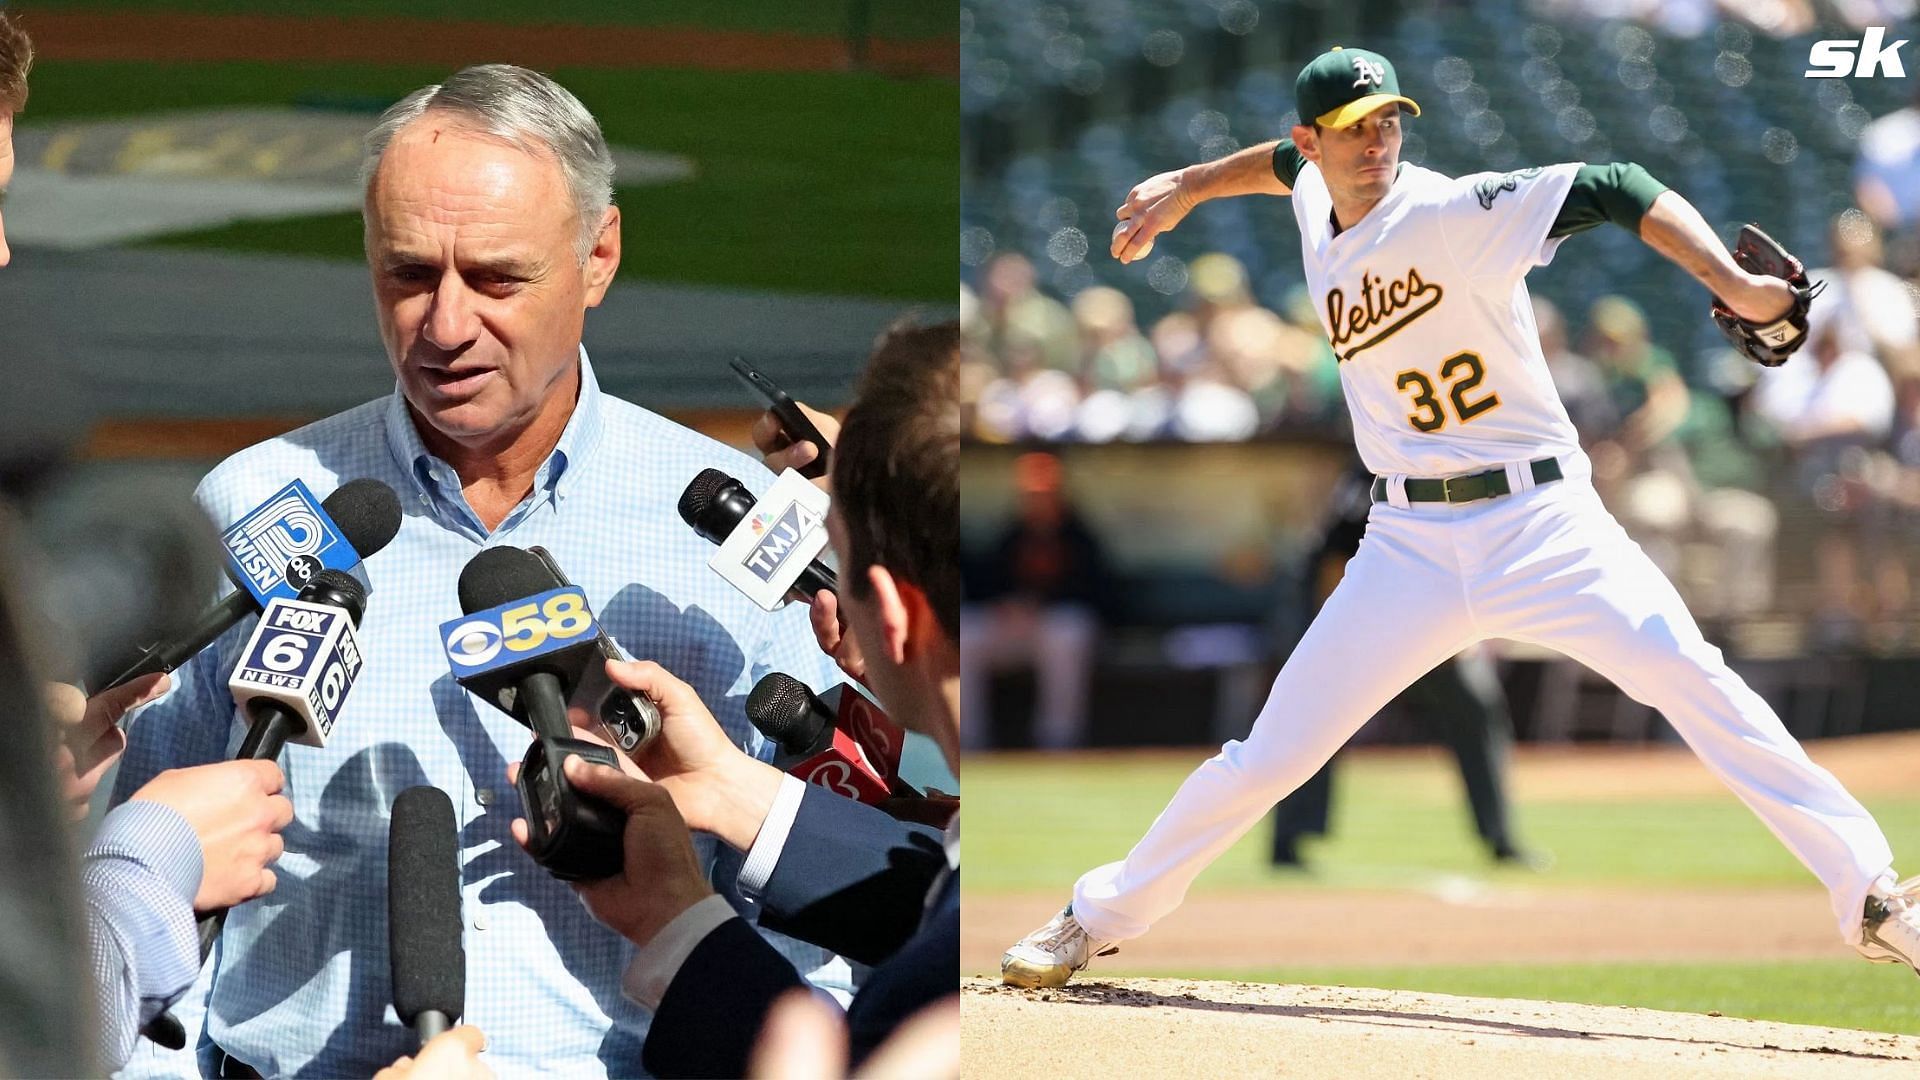 F—king pathetic': Former Oakland A's pitcher blasts MLB commissioner